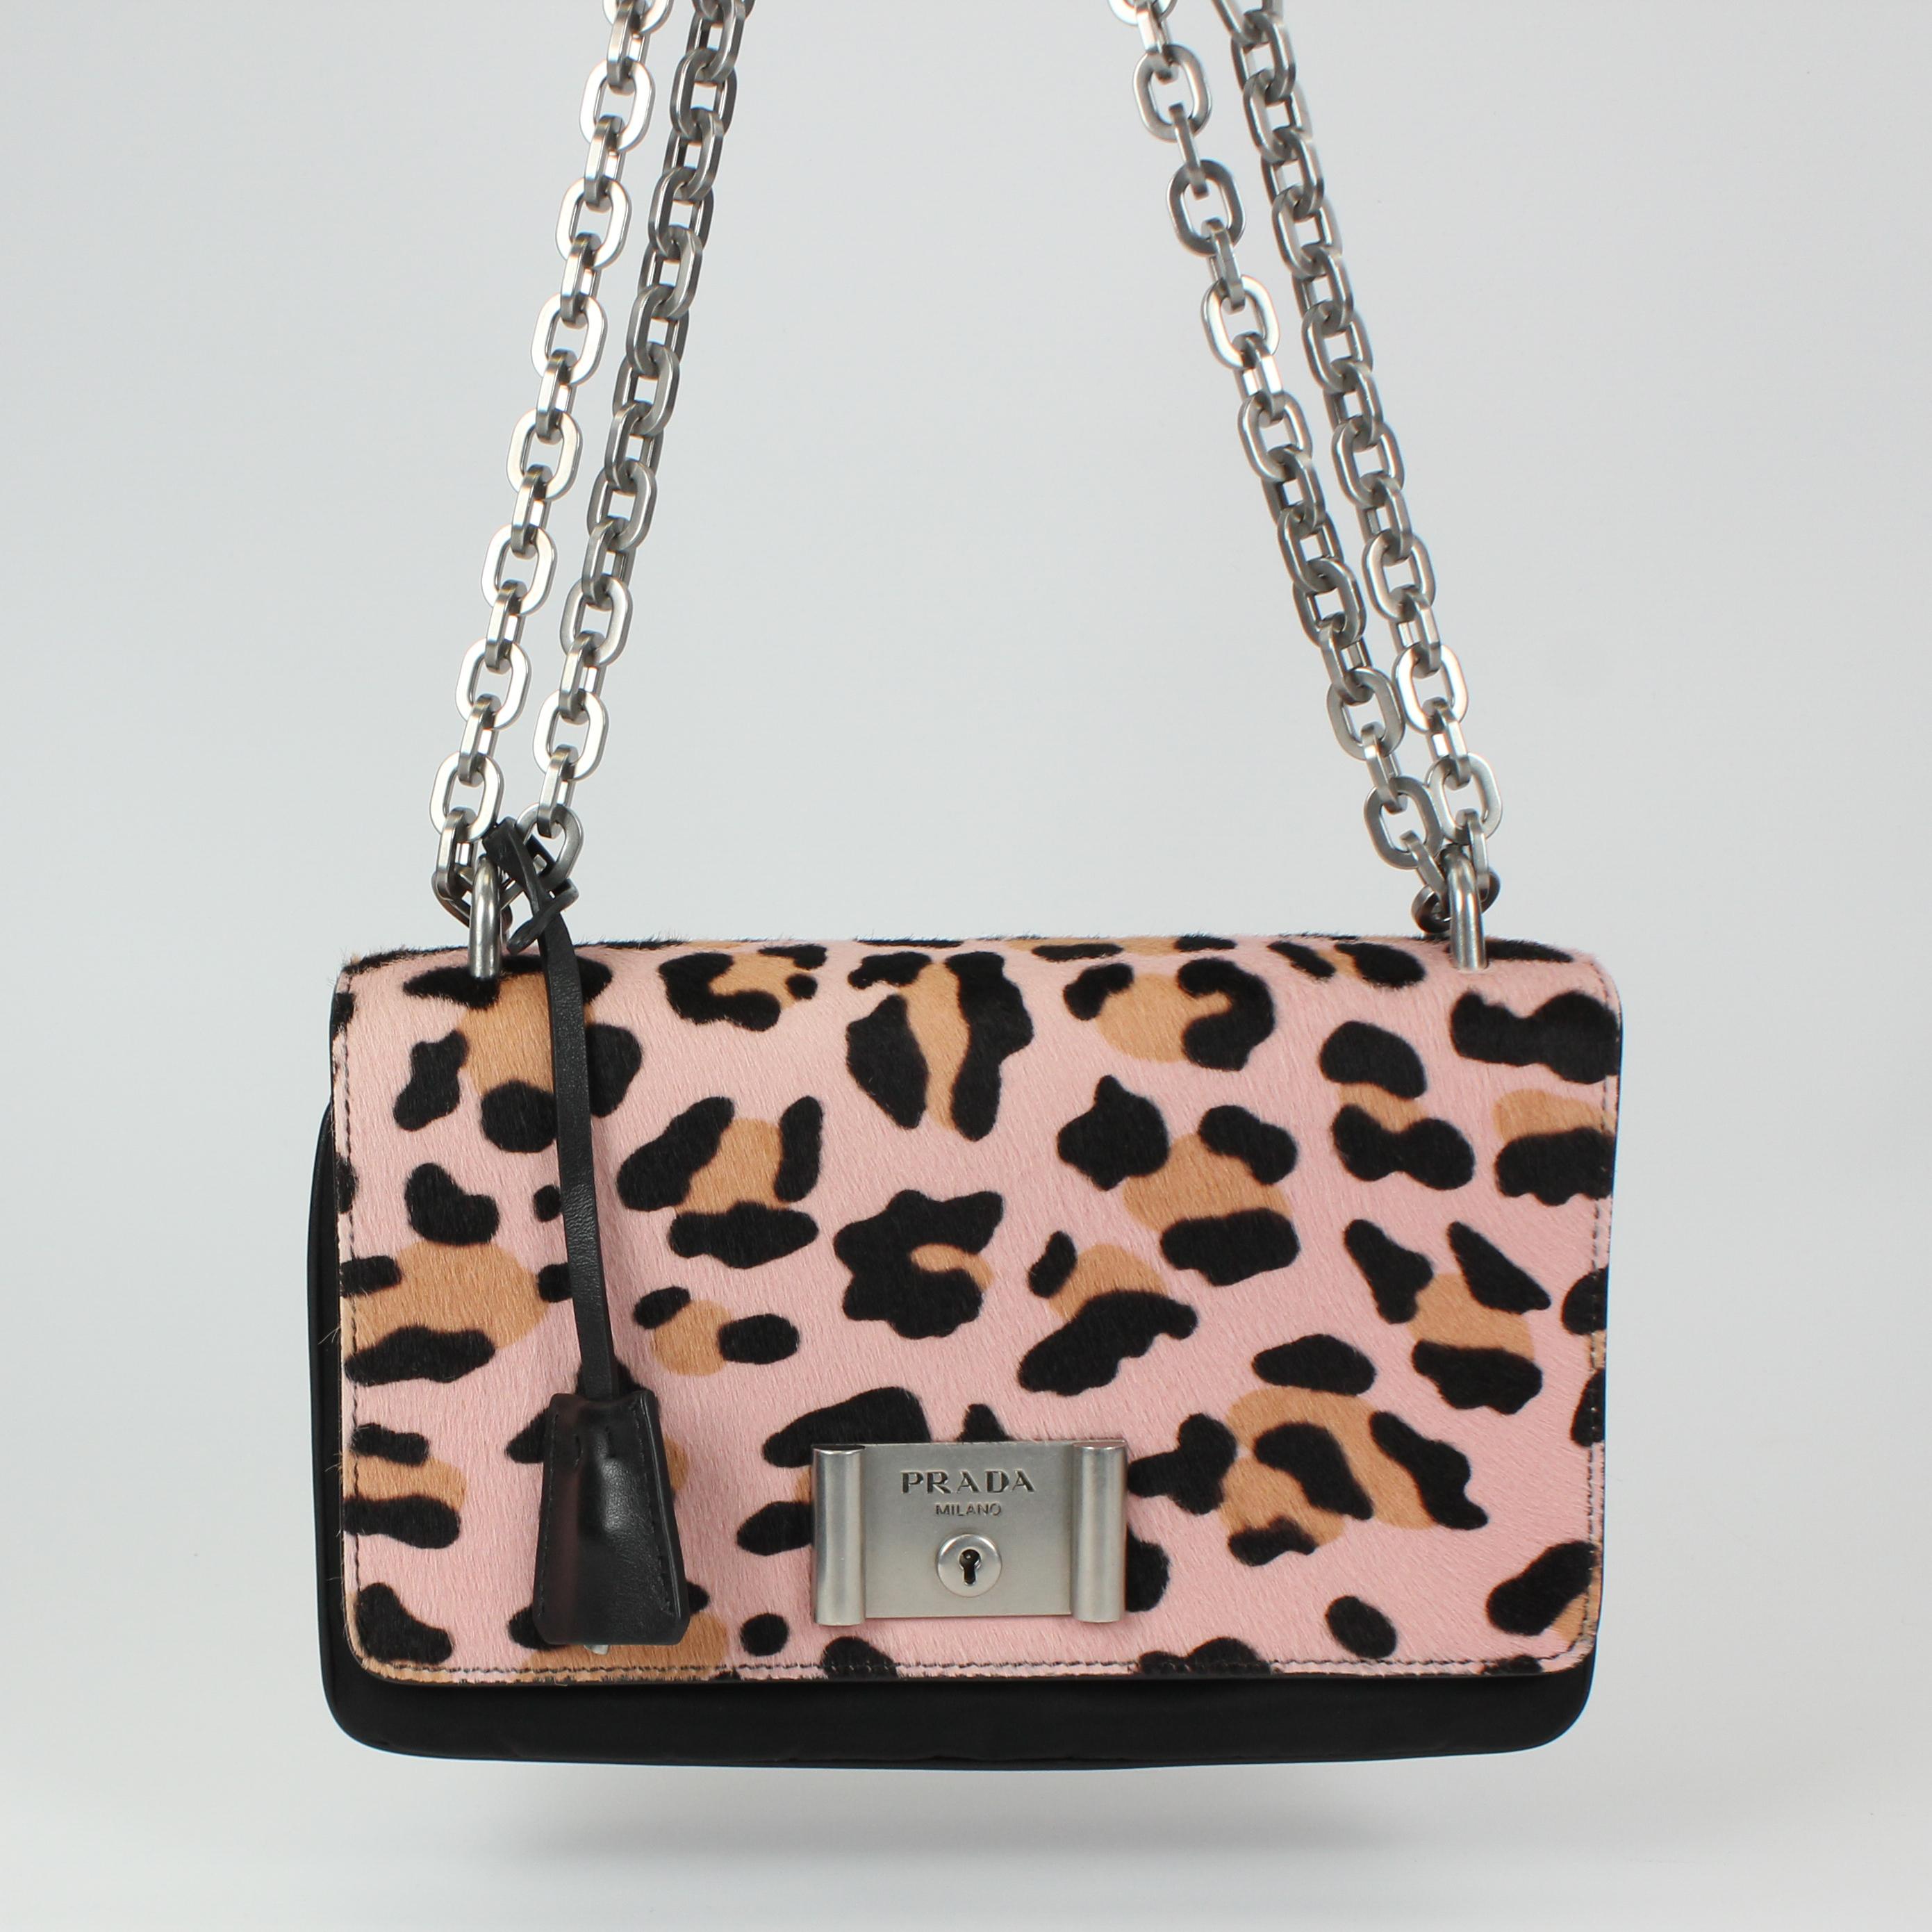 This Prada Pink Leopard Print Pony Hair and Nylon Chain Shoulder Bag 1BD009 features a chunky silvertone chain shoulder strap and a push-lock. Wear this with a colorful ensemble or stick to the all black and white trend for a crisp and modern